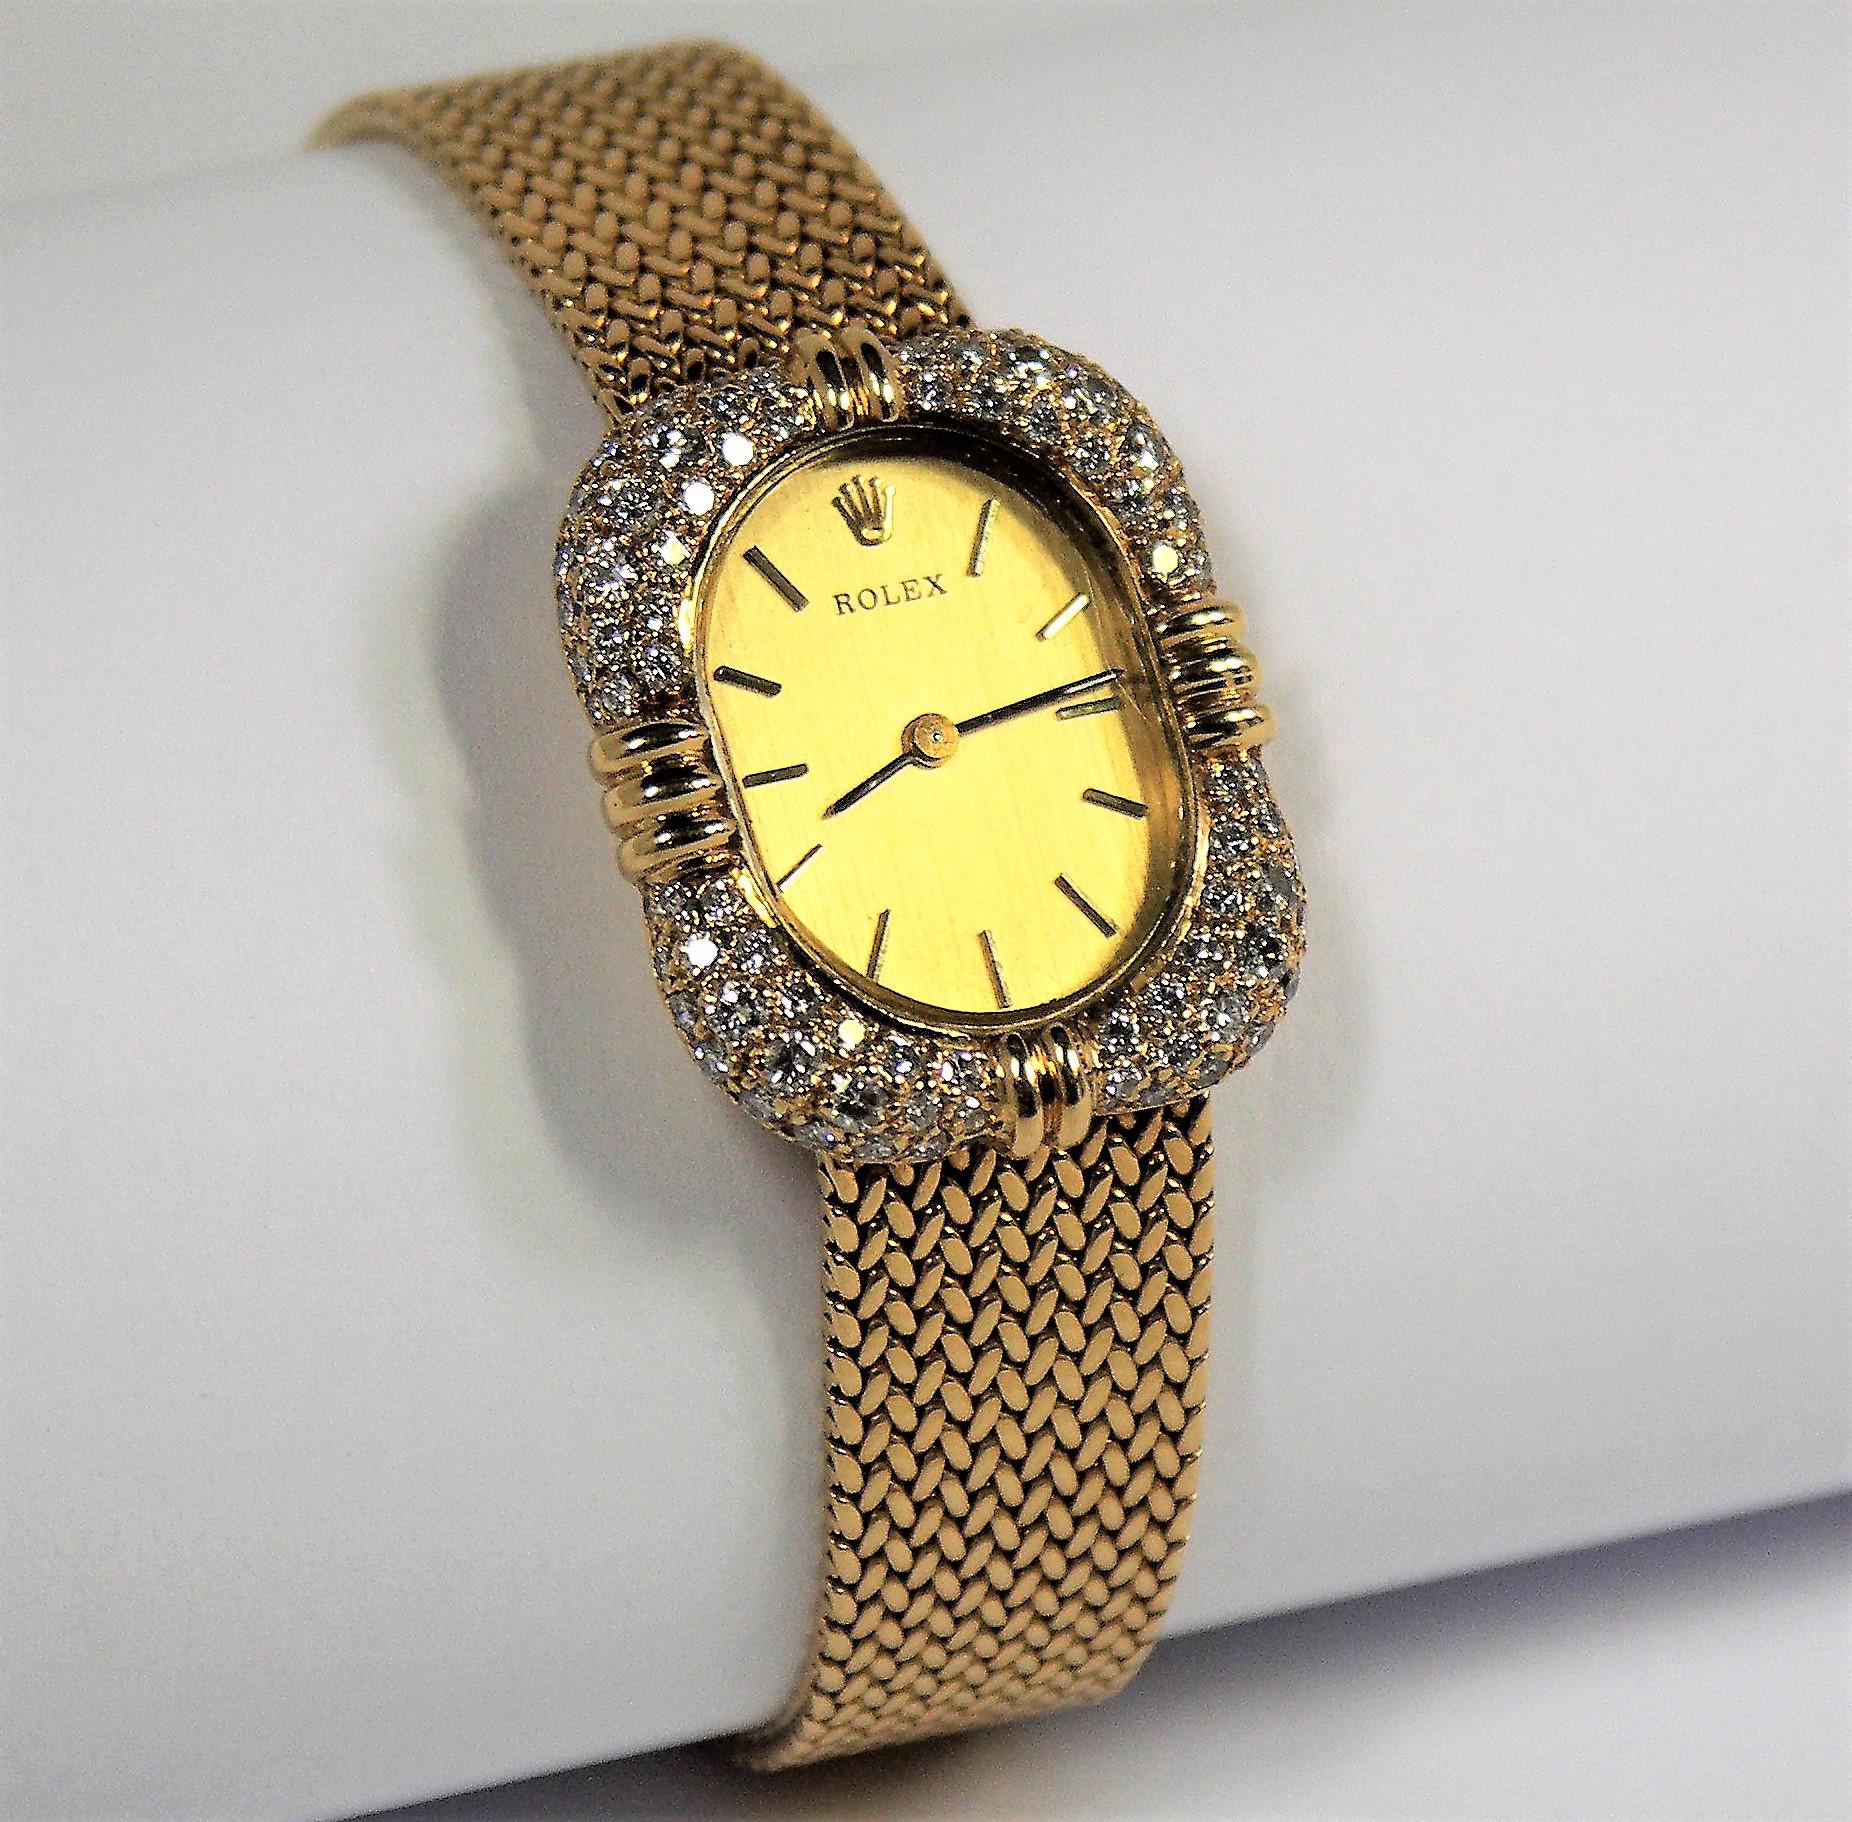 The elegant, all factory original, diamond encrusted surround of this mid-century ladies dress Rolex, is set with an approximate total weight of 3 carats of overall F/G color,  VS1 clarity diamonds. The shape of the diamond encrusted surround is an